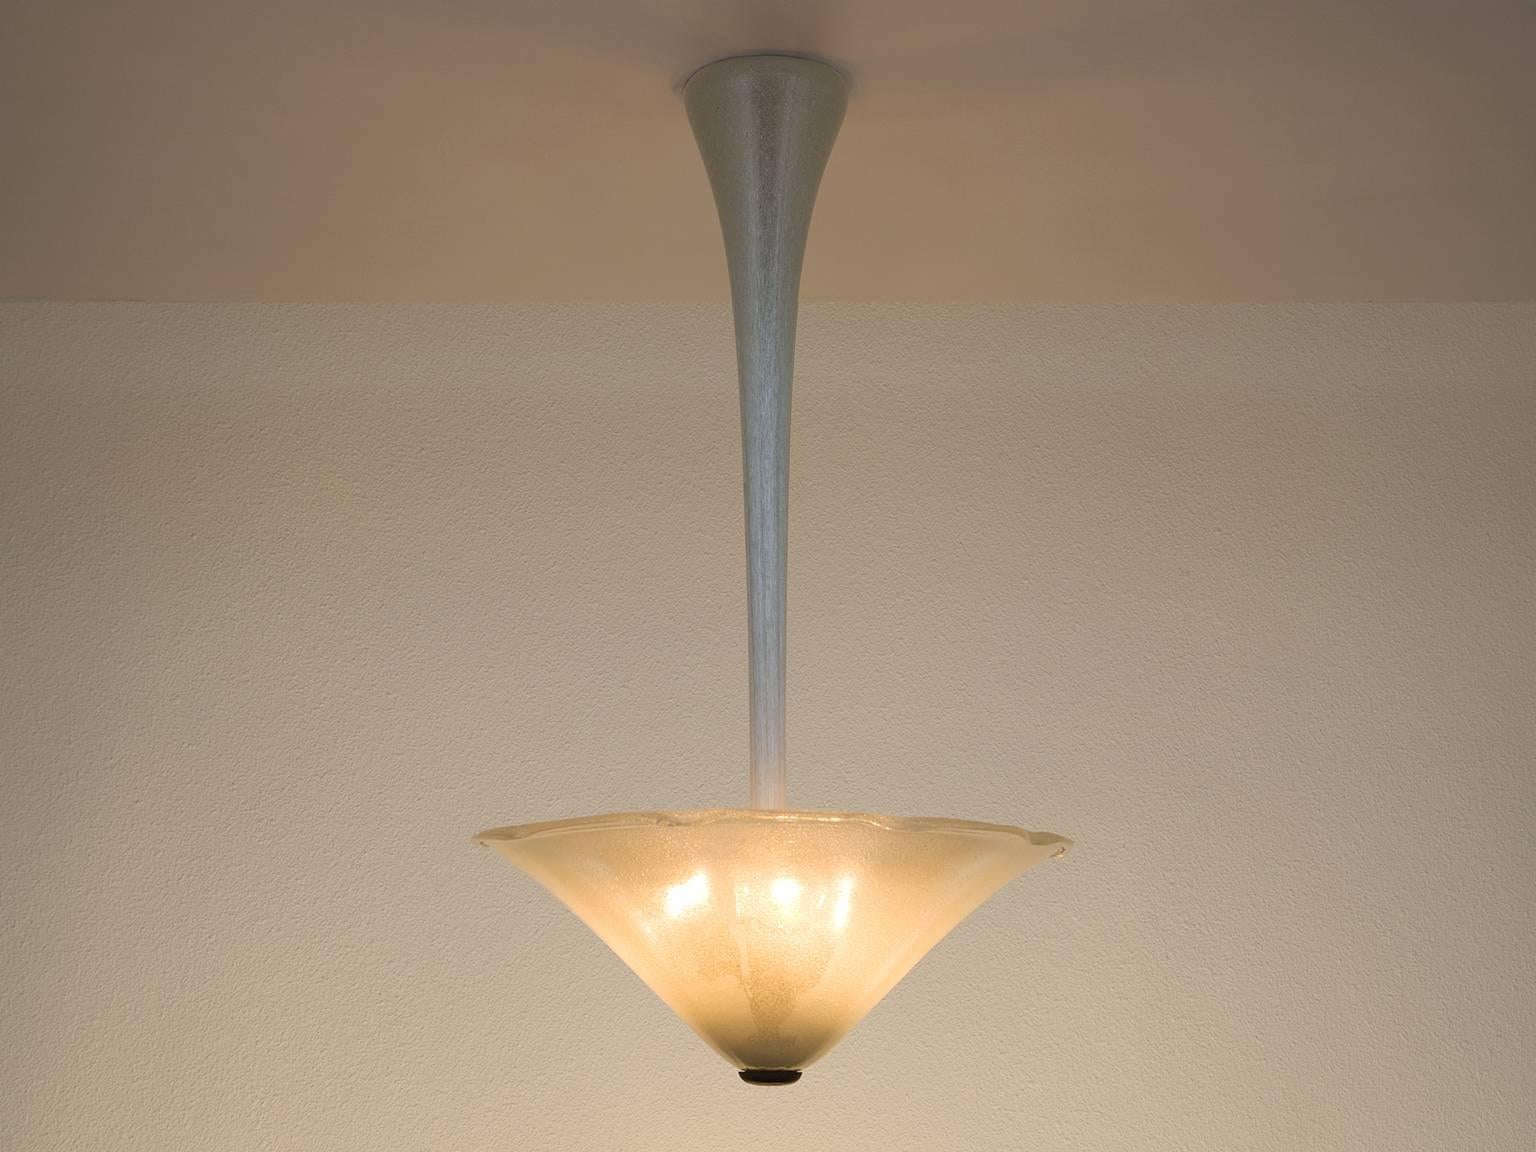 Pendant, Pulegoso glass, Italy, 1950s.

The organic, delicate shape of this chandelier resembles that of a flower or mushroom. Dropping from the sealing like a stem, the shade of the pendant shows an upward rise and fans out in a soft, natural